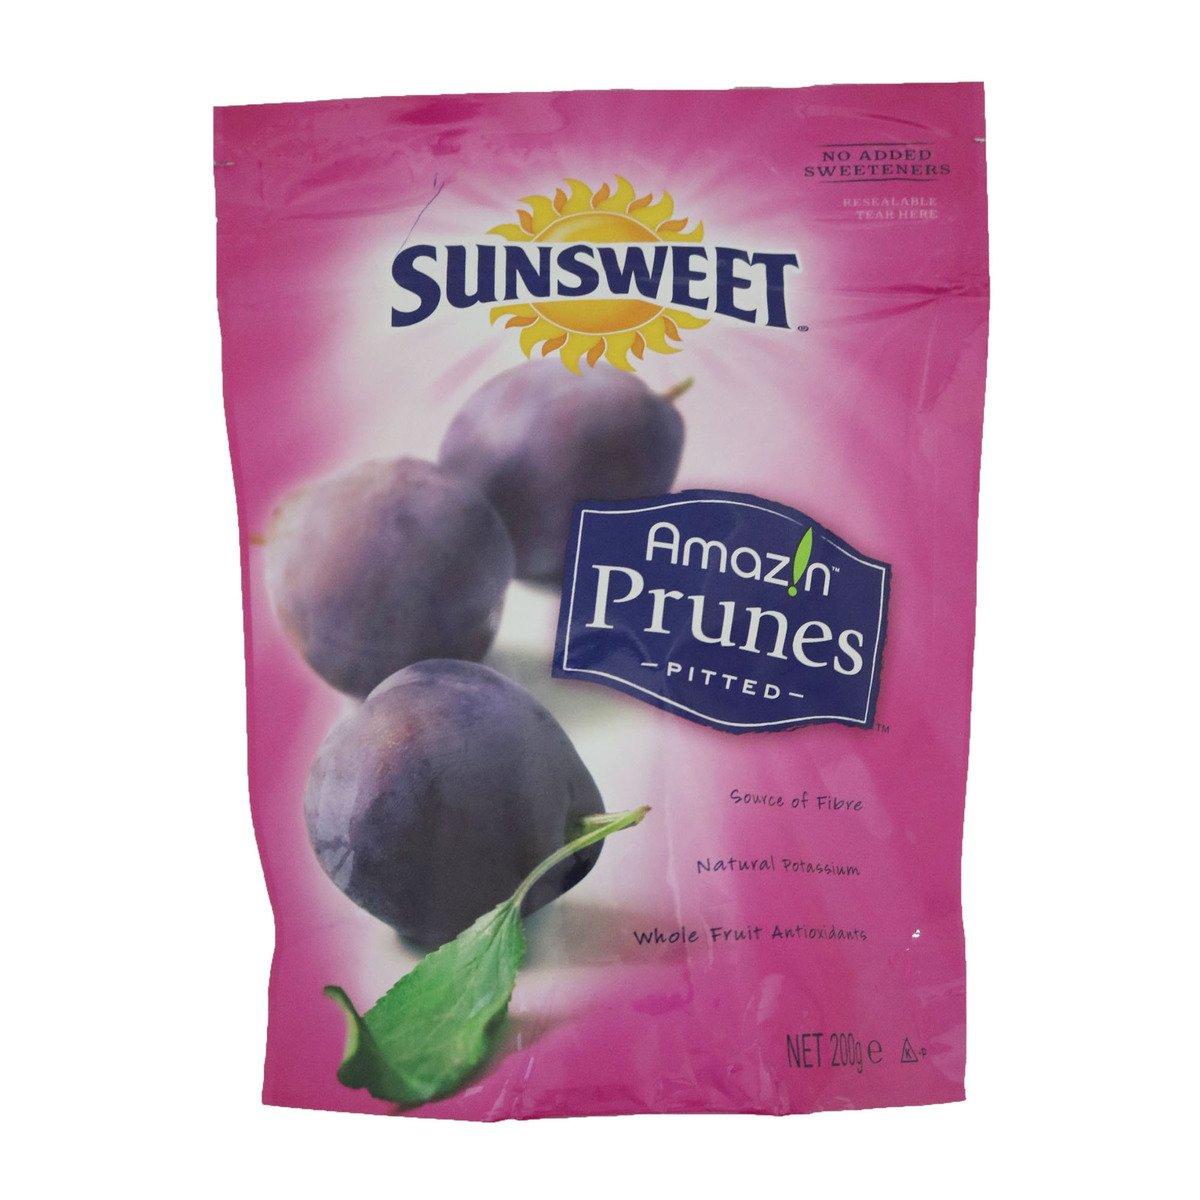 Sunsweet Pitted Prunes 200g